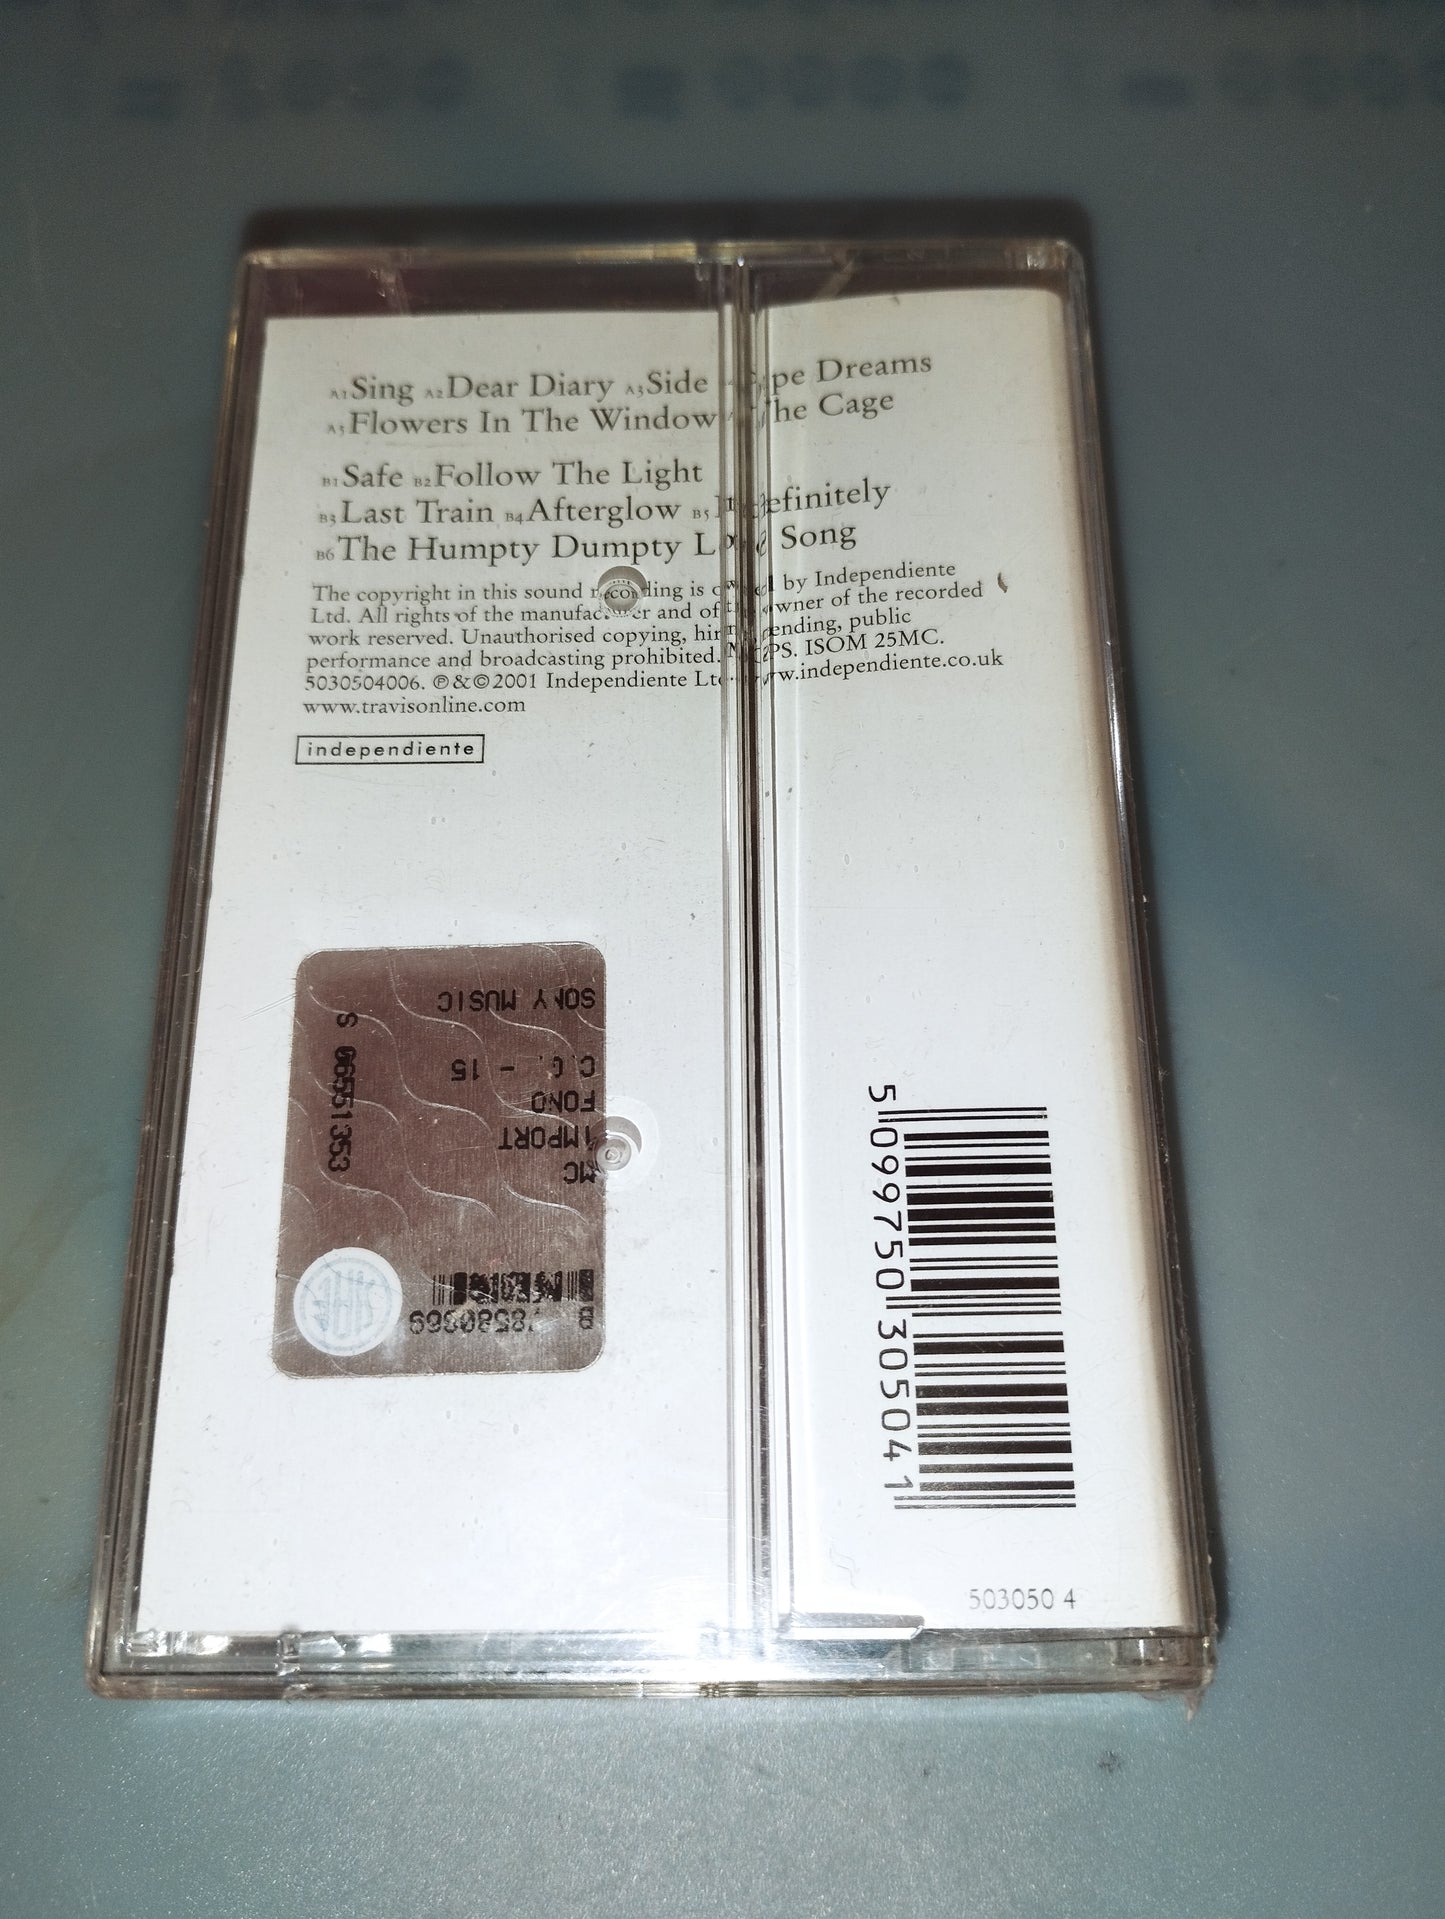 The Invisible Band" Travis Music Sealed Cassette